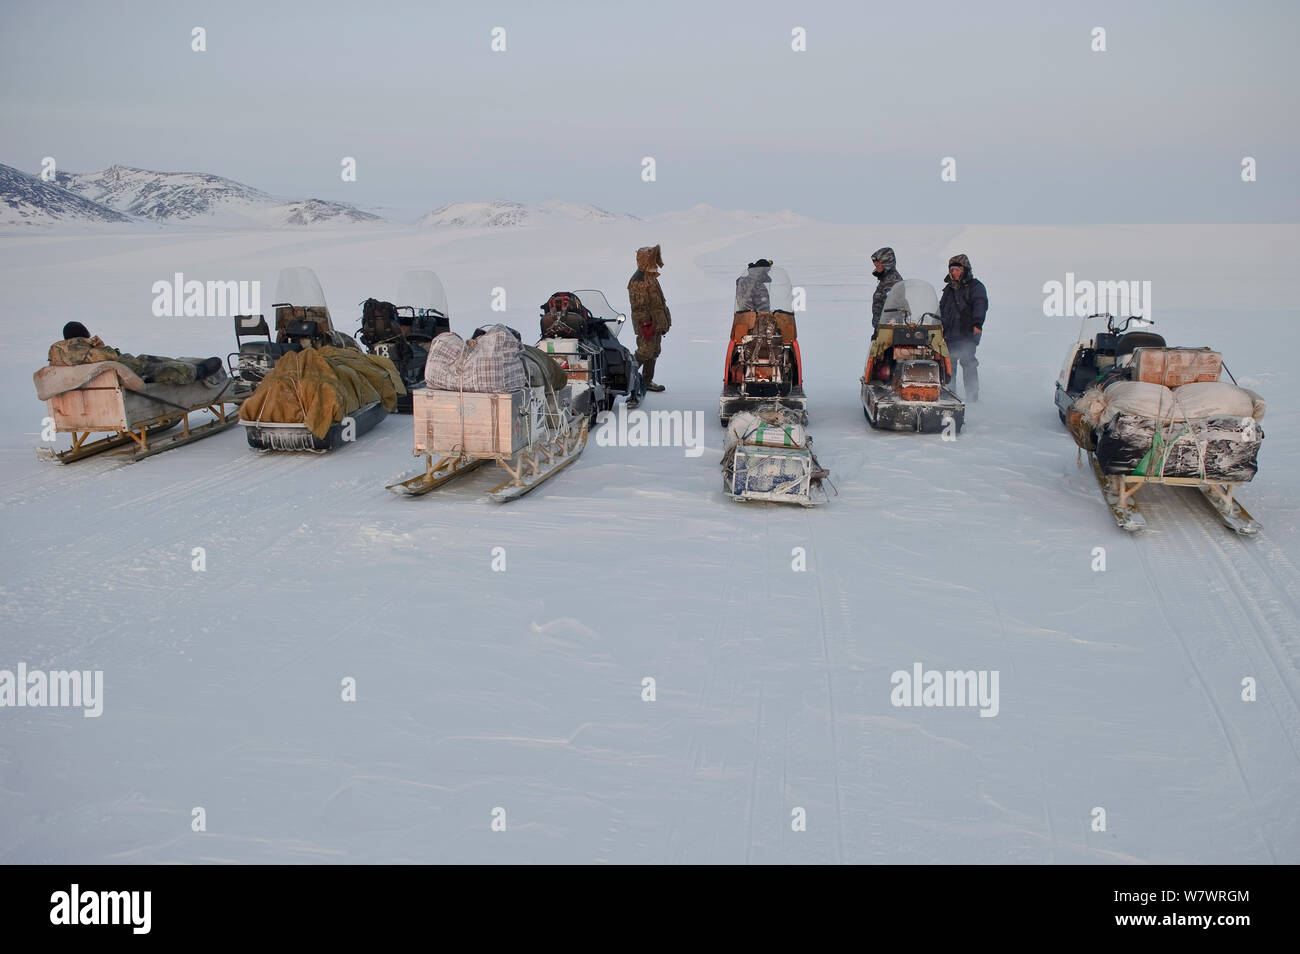 Men on snowmobiles removing items from bringing items to photographers camp, Wrangel Island, Far Eastern Russia, March 2011. Stock Photo